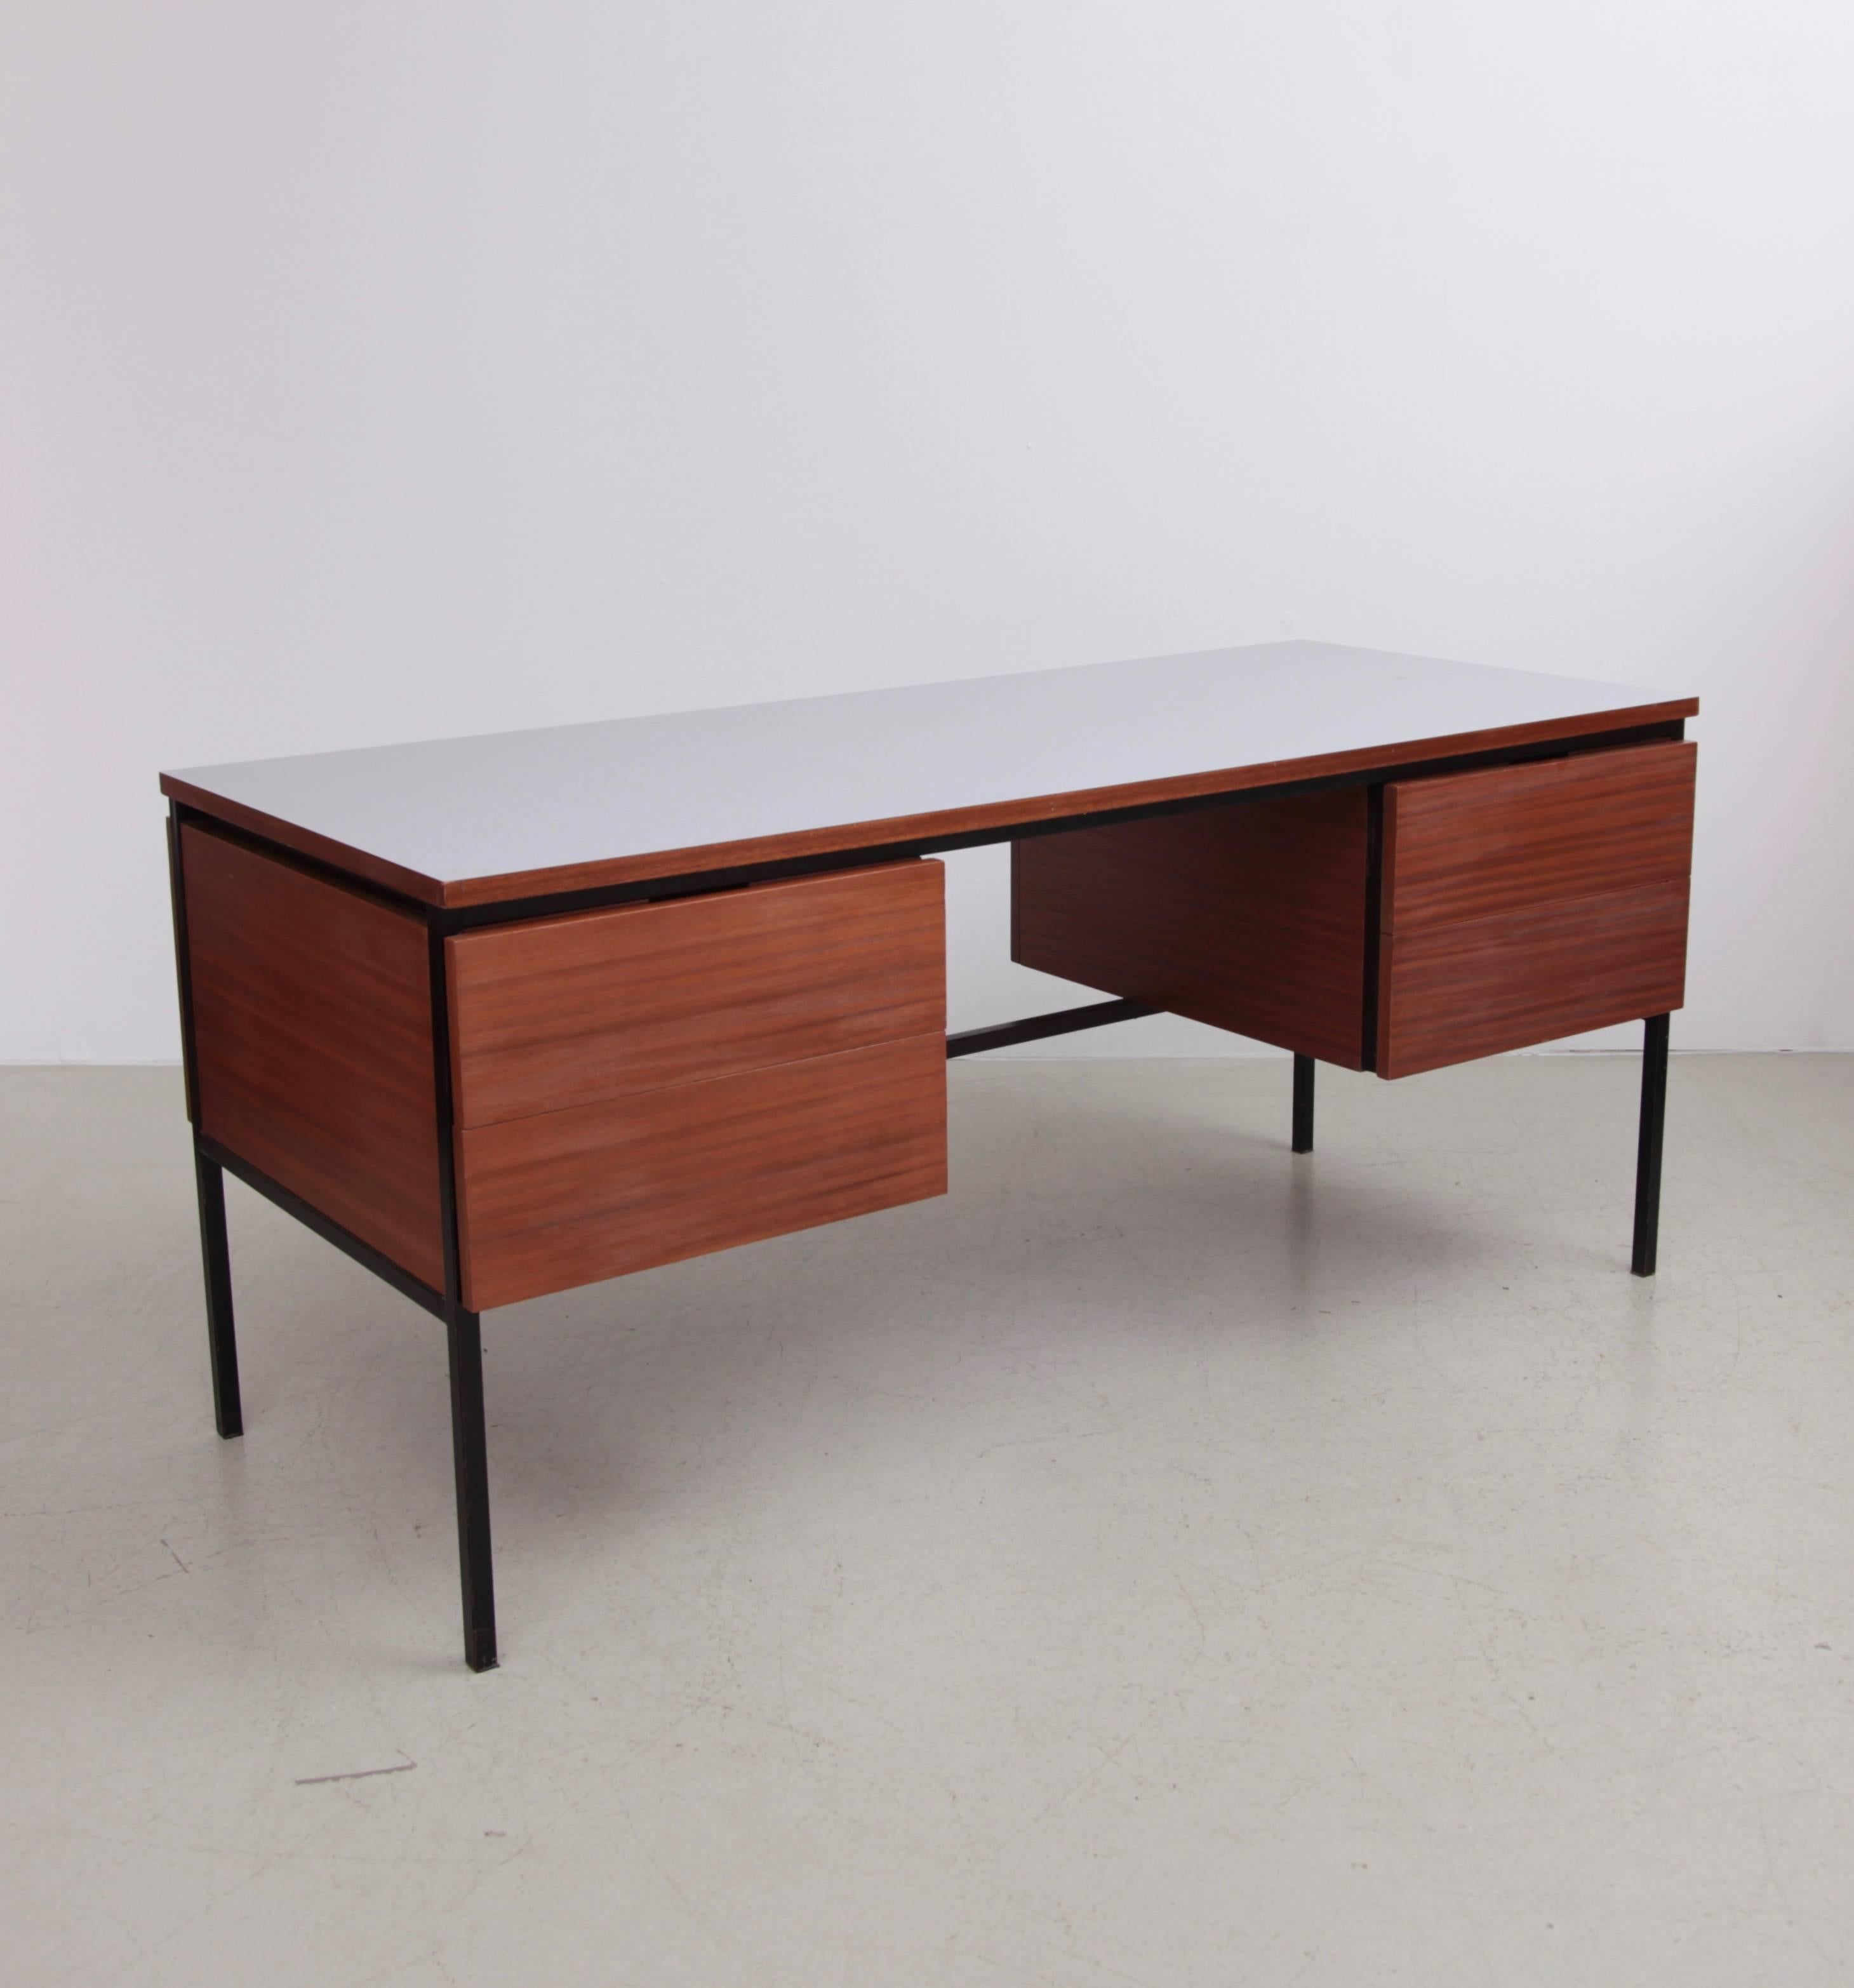 Beautiful desk designed by Pierre Guariche for Minivelle. Grey laminate top and black lacquered steel base. Mahogany wood. Excellent condition.

